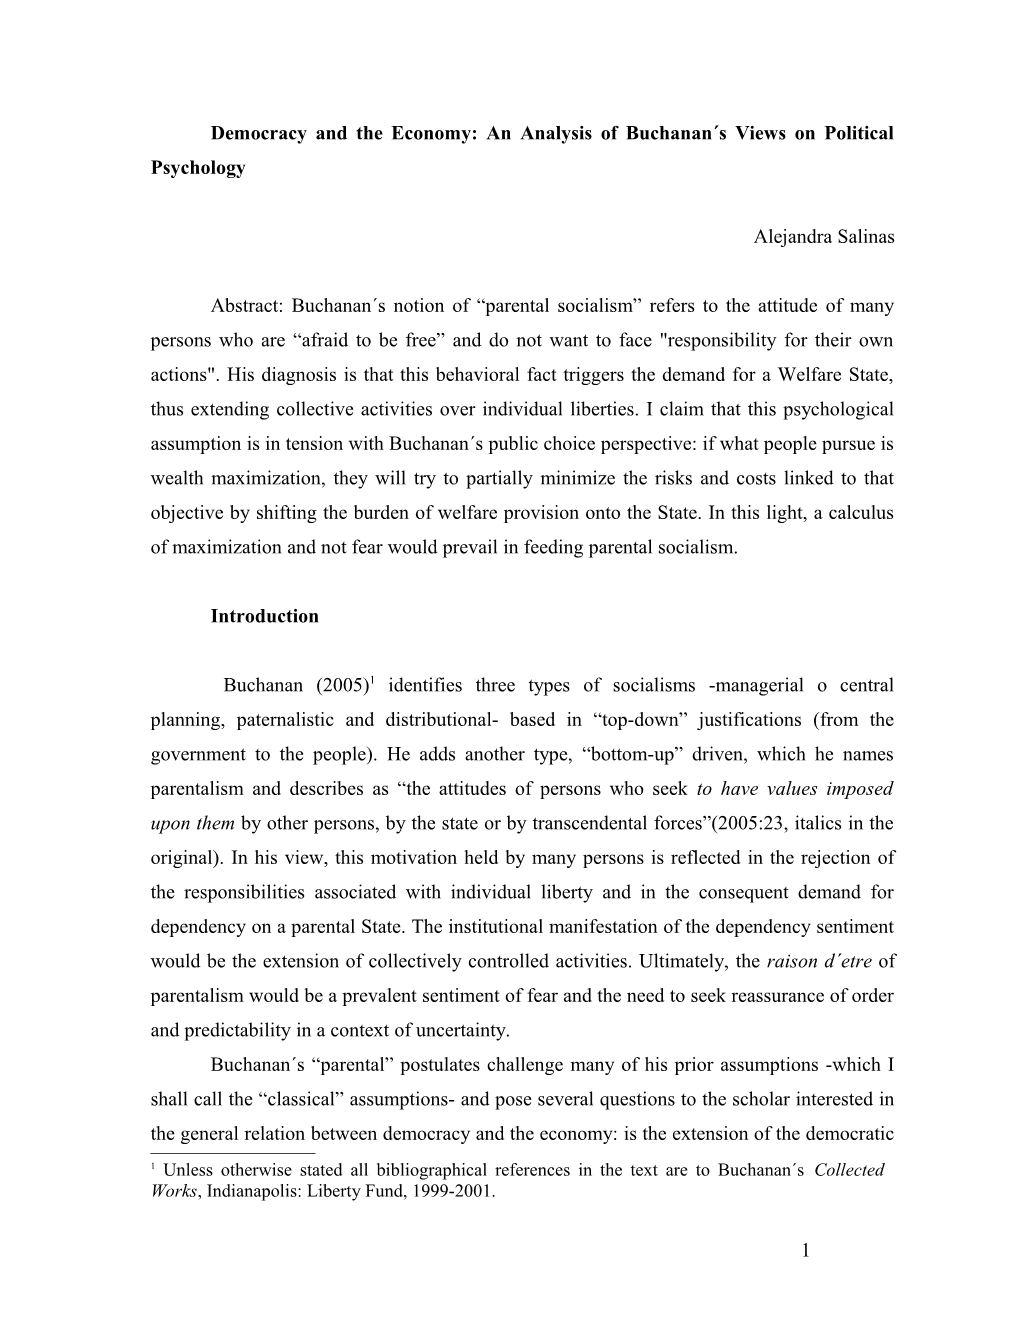 Democracy and the Economy: an Analysis of Buchanan S Views on Political Psychology